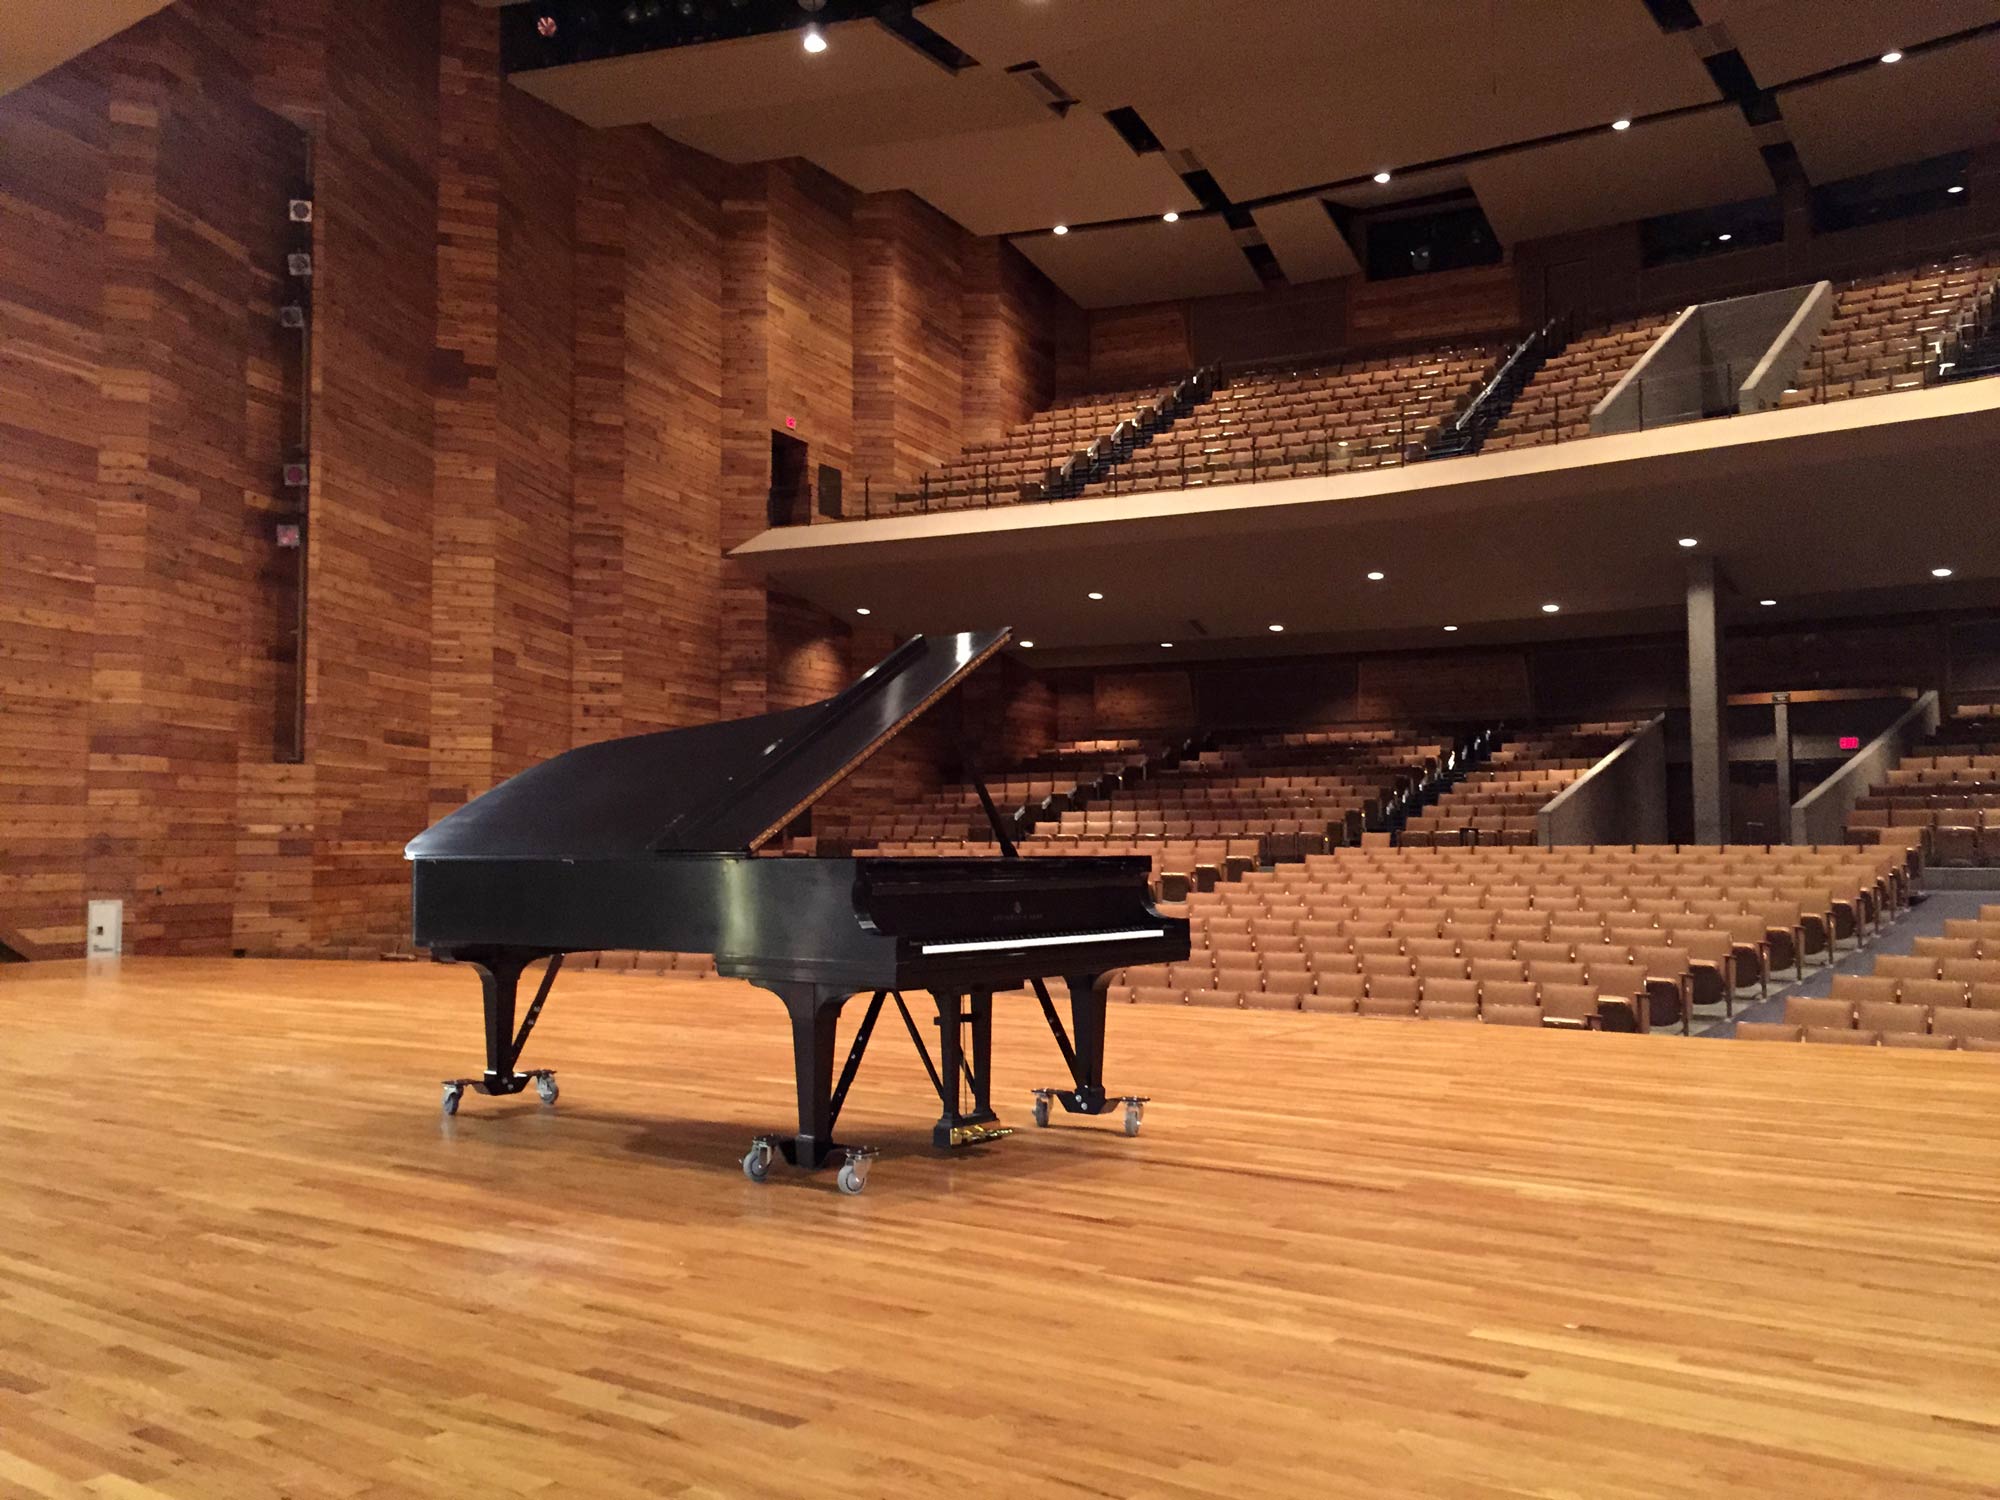 Steinway Concert Grand on the Cheyenne Civic Center Stage